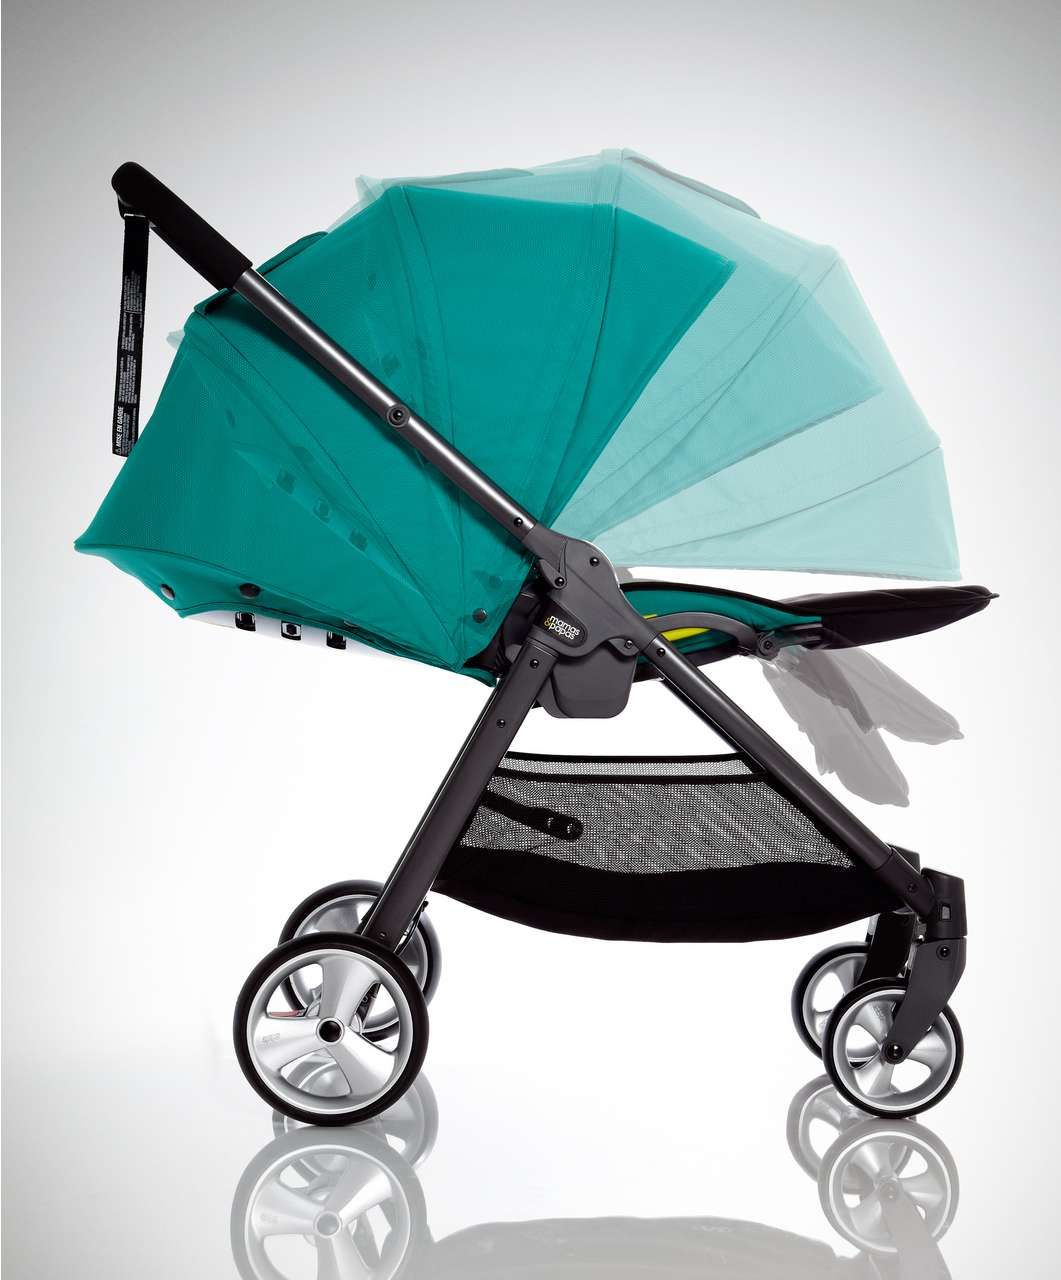 Reversible Strollers: Flexibility and Convenience in Facing Forward or Rearward